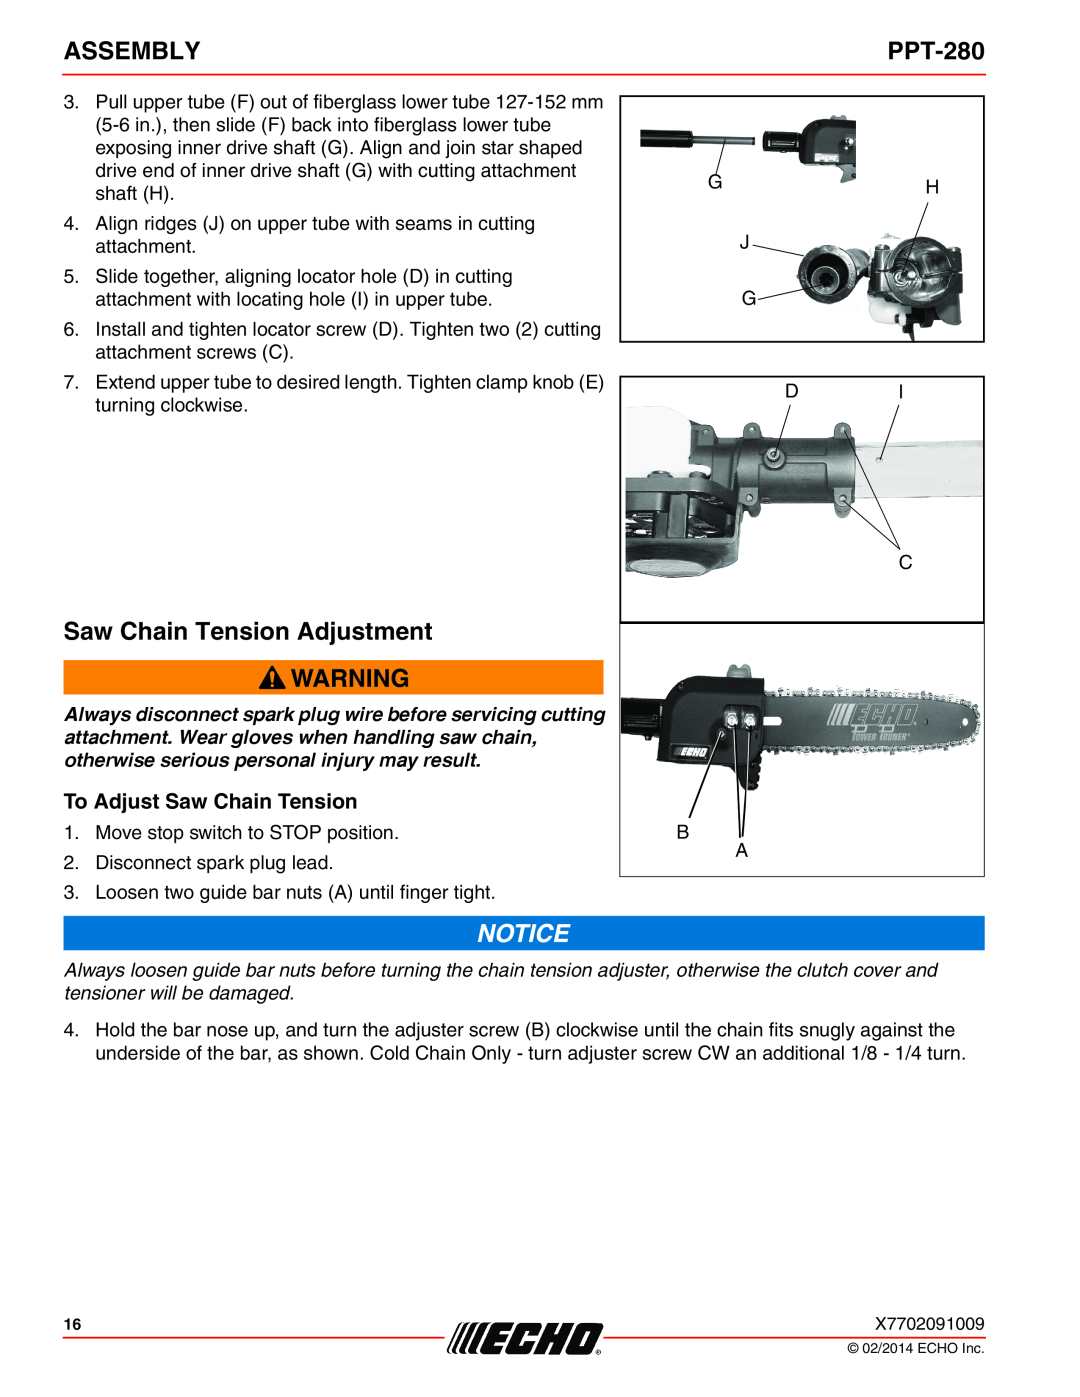 Echo PPT-280 specifications Saw Chain Tension Adjustment, To Adjust Saw Chain Tension, Assembly 